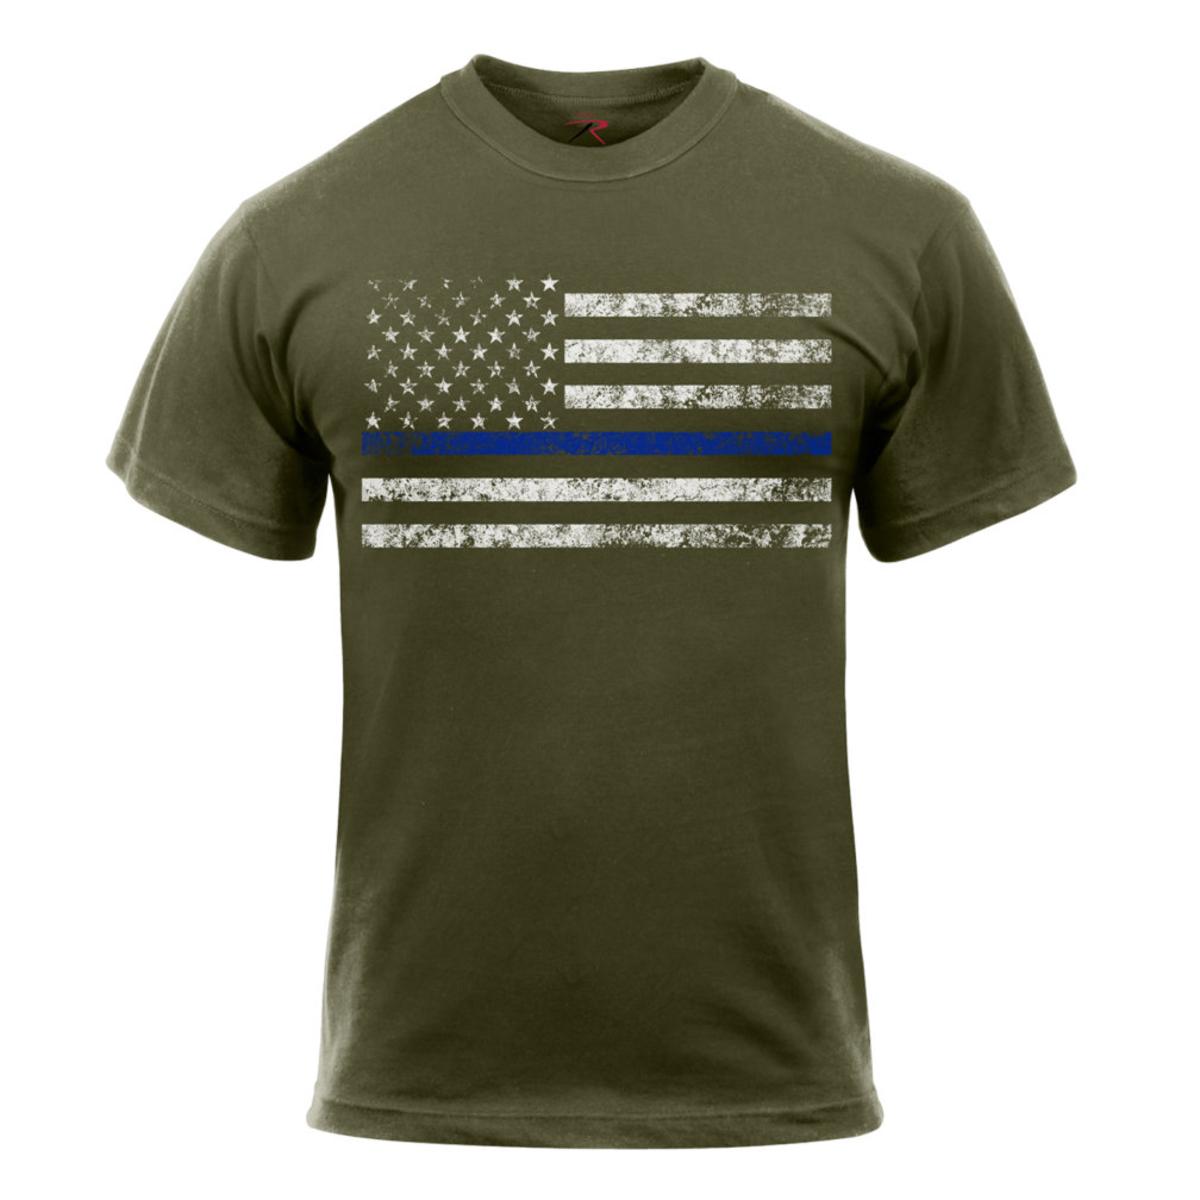 Rothco Thin Blue Line, Police Law Enforcement Support Flag T-Shirt | eBay